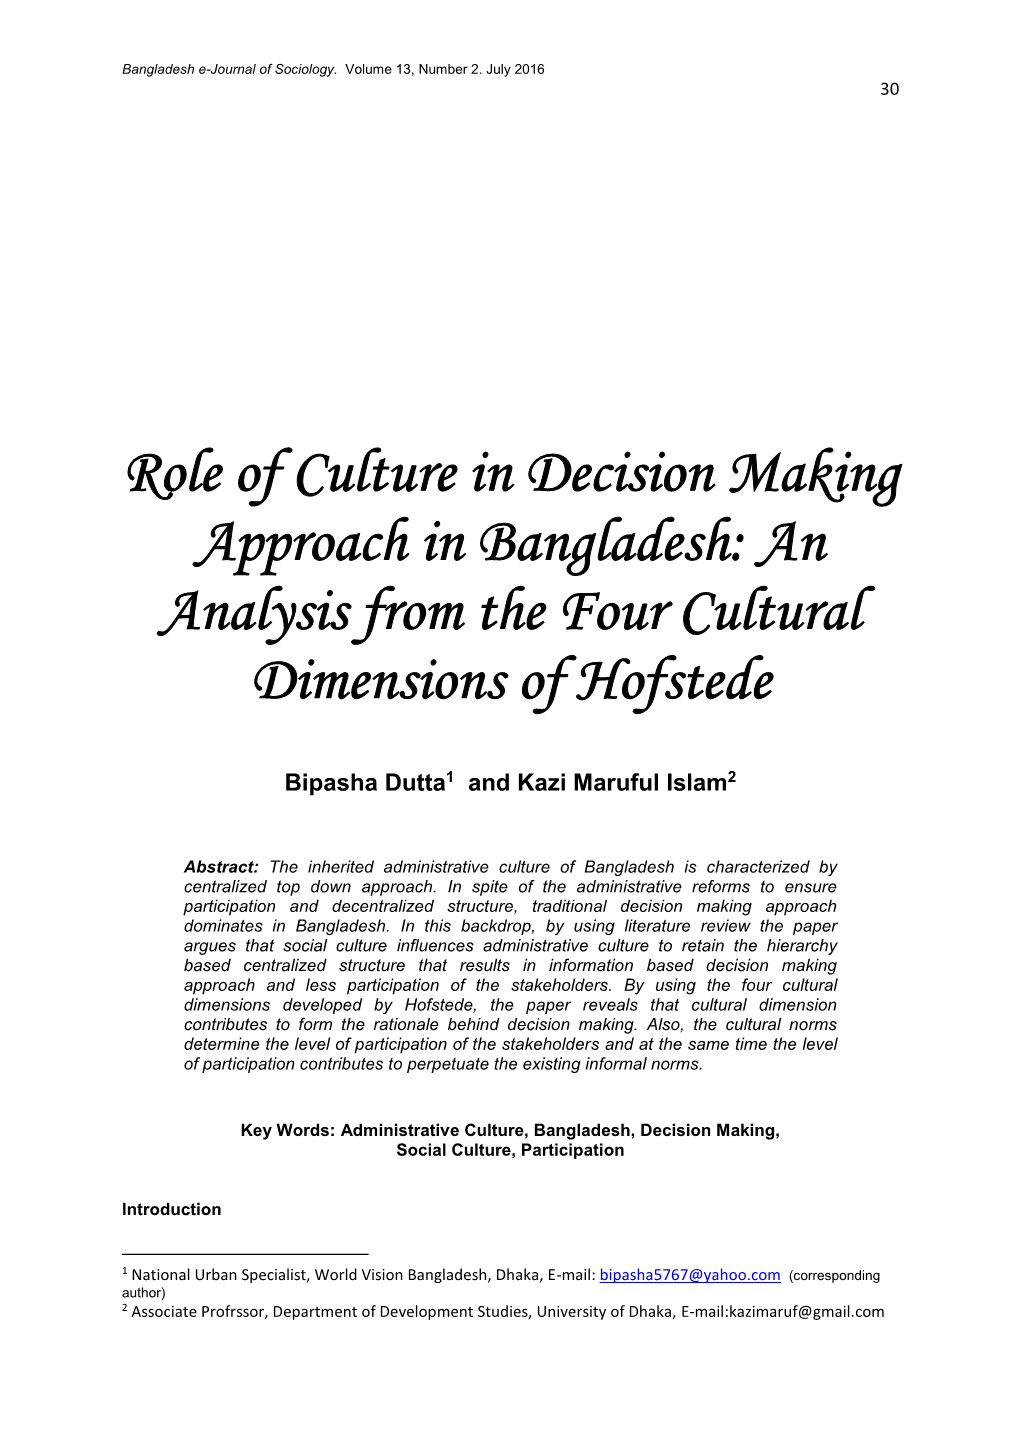 Role of Culture in Decision Making Approach in Bangladesh: an Analysis from the Four Cultural Dimensions of Hofstede